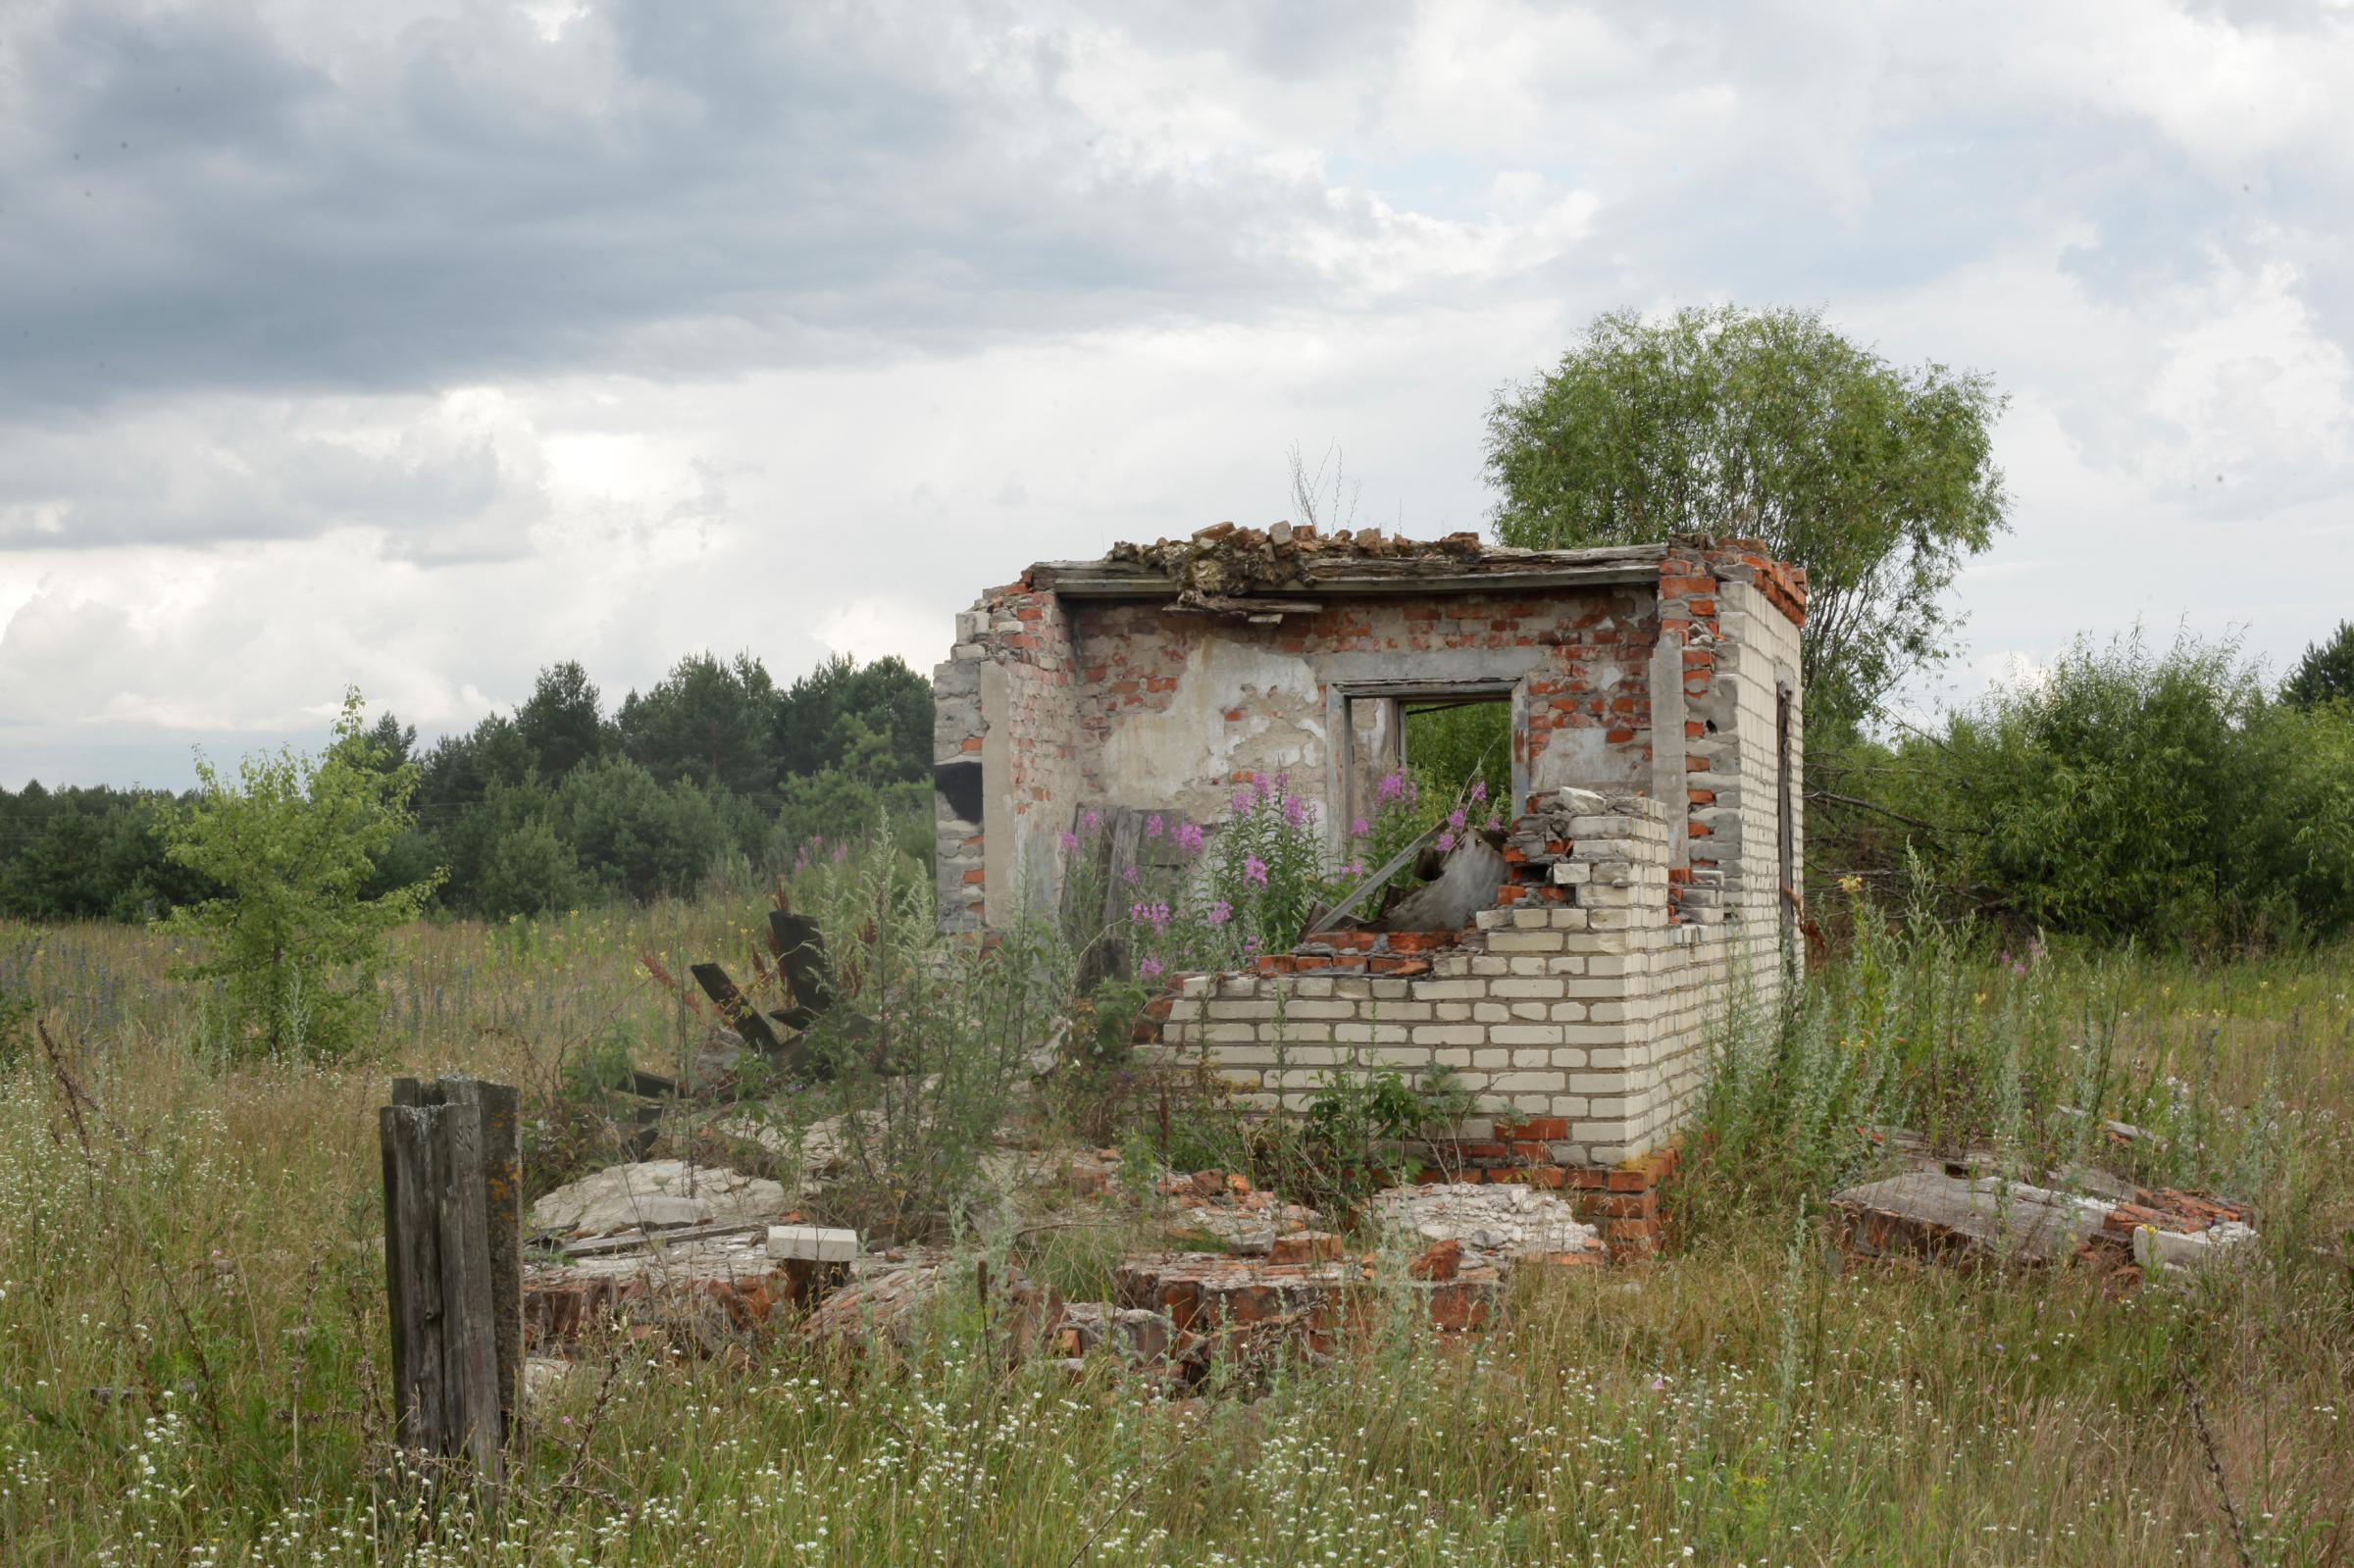 A decayed house in Chernobyl, Belarus on July 9, 2014.